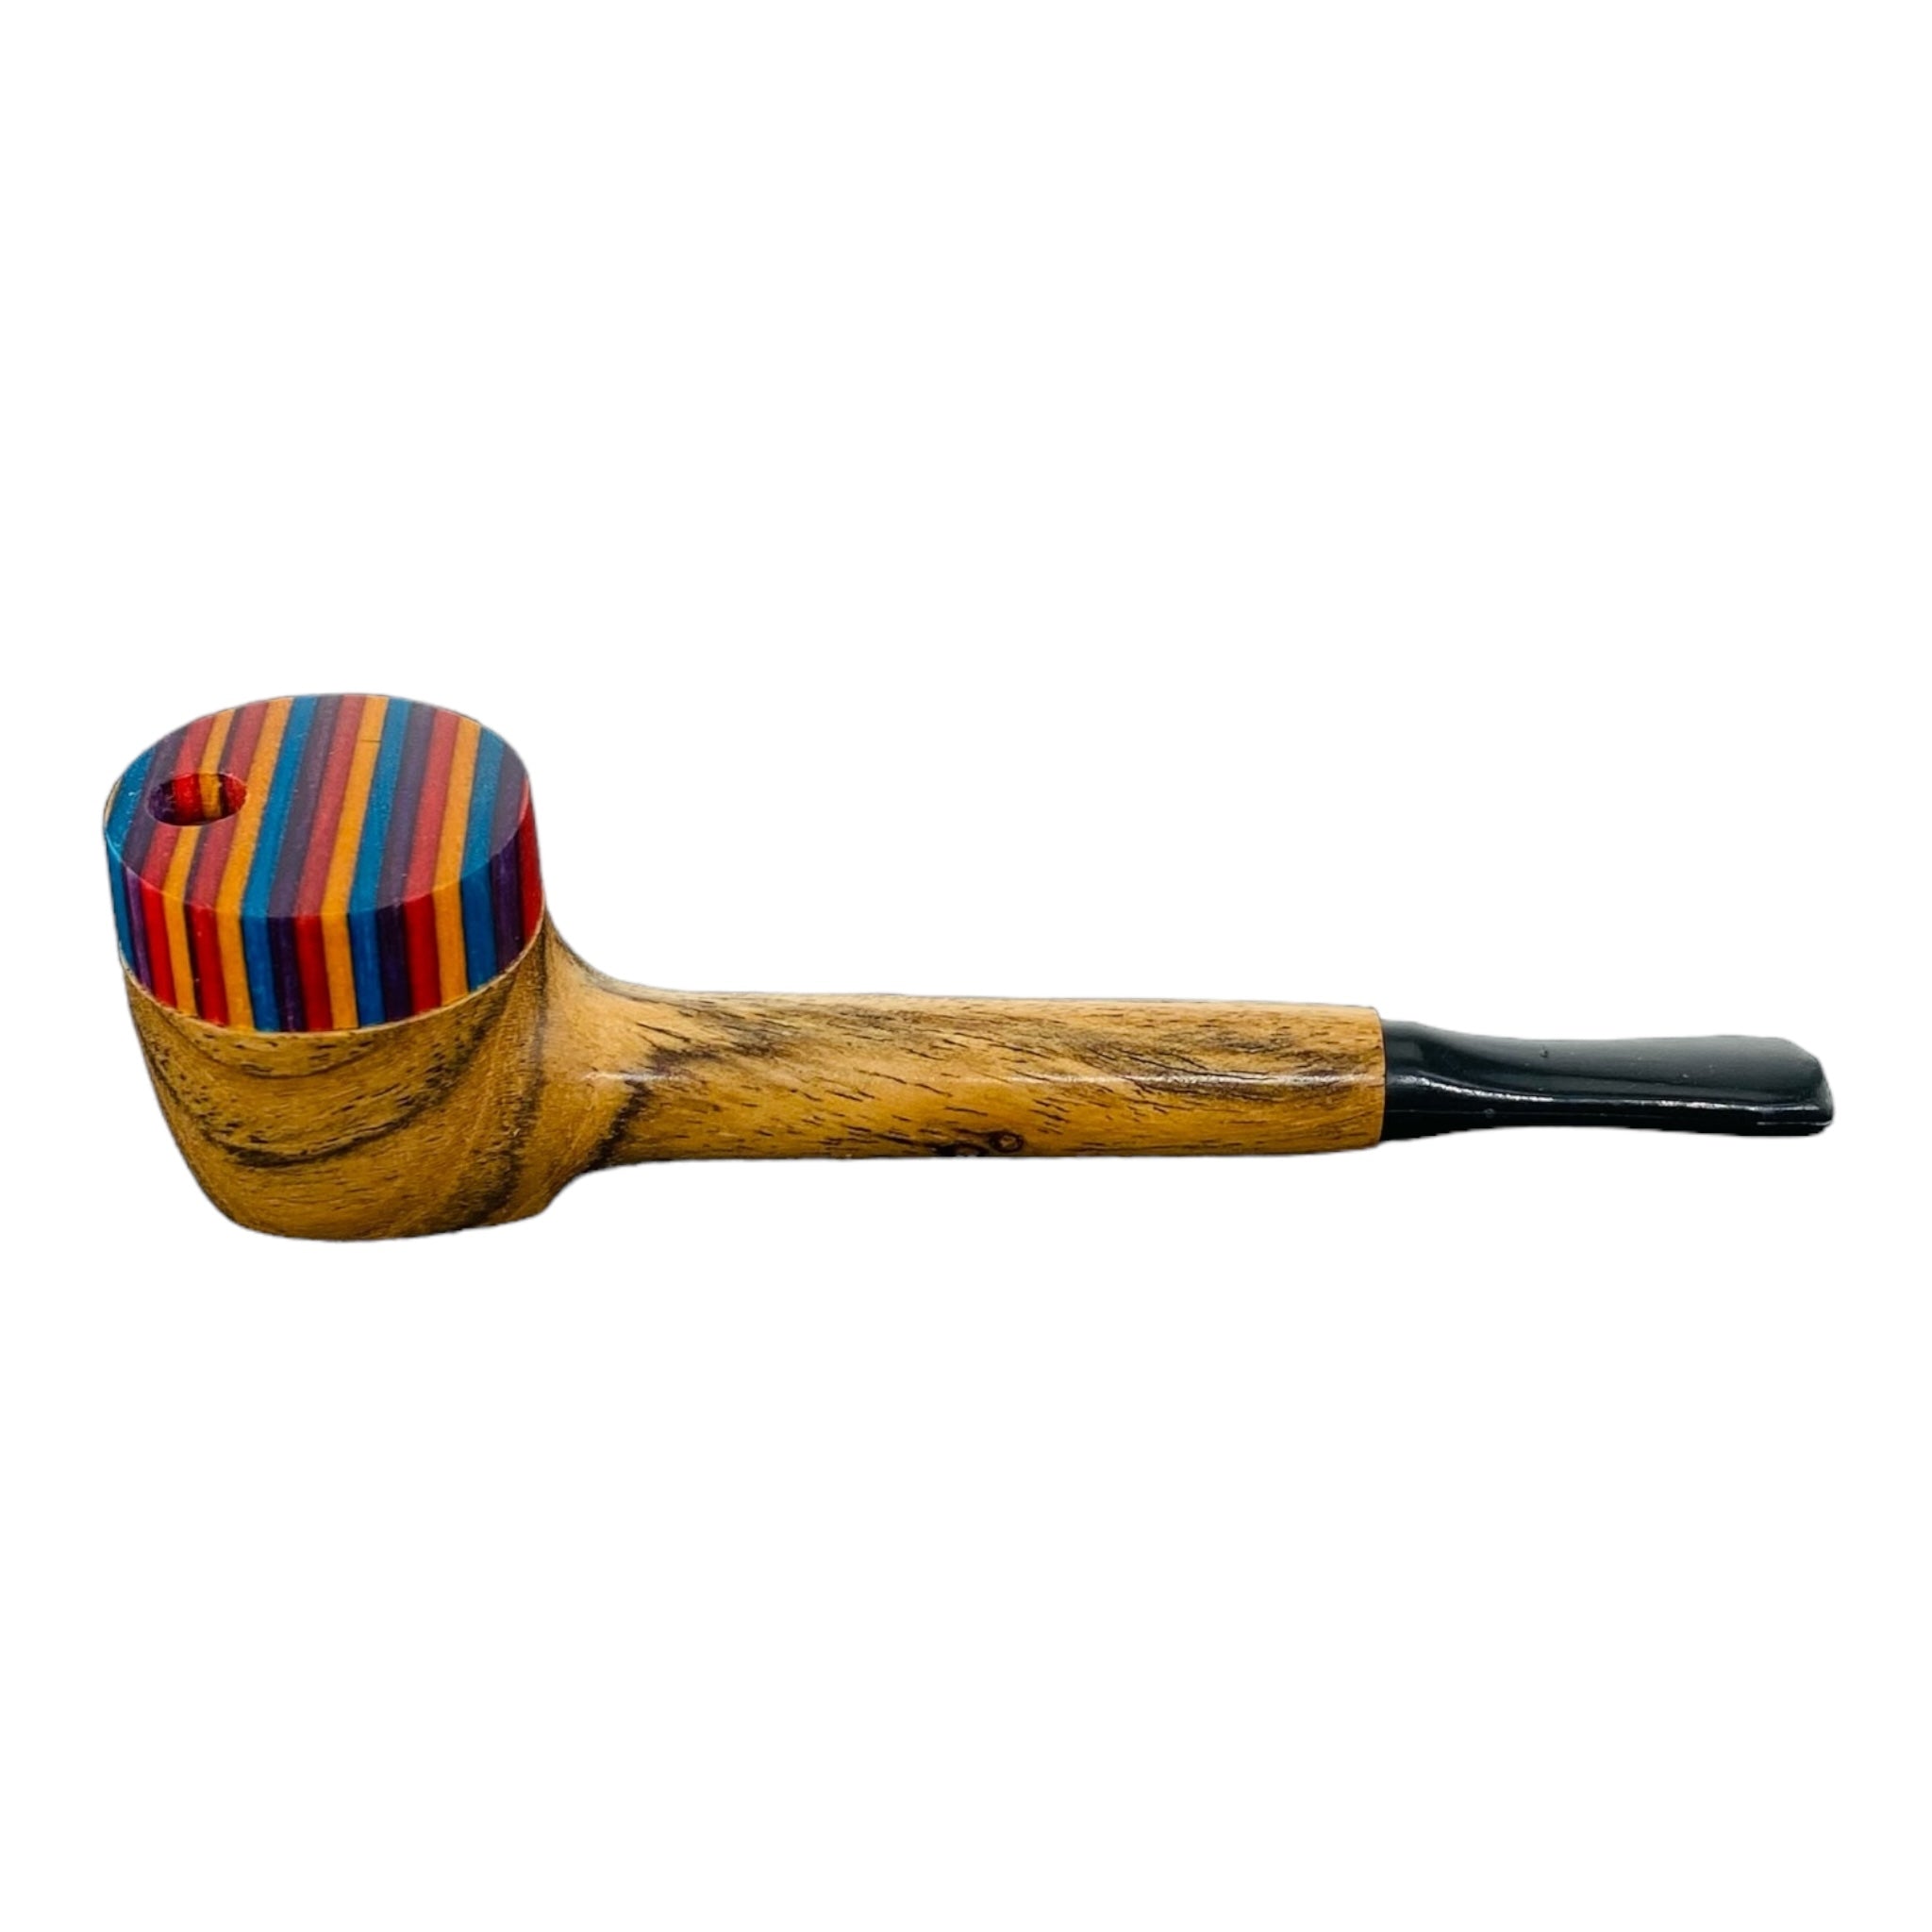 Wood Hand Pipe - Slender Stem With Multi Colored Lid And Plastic Mouthpiece